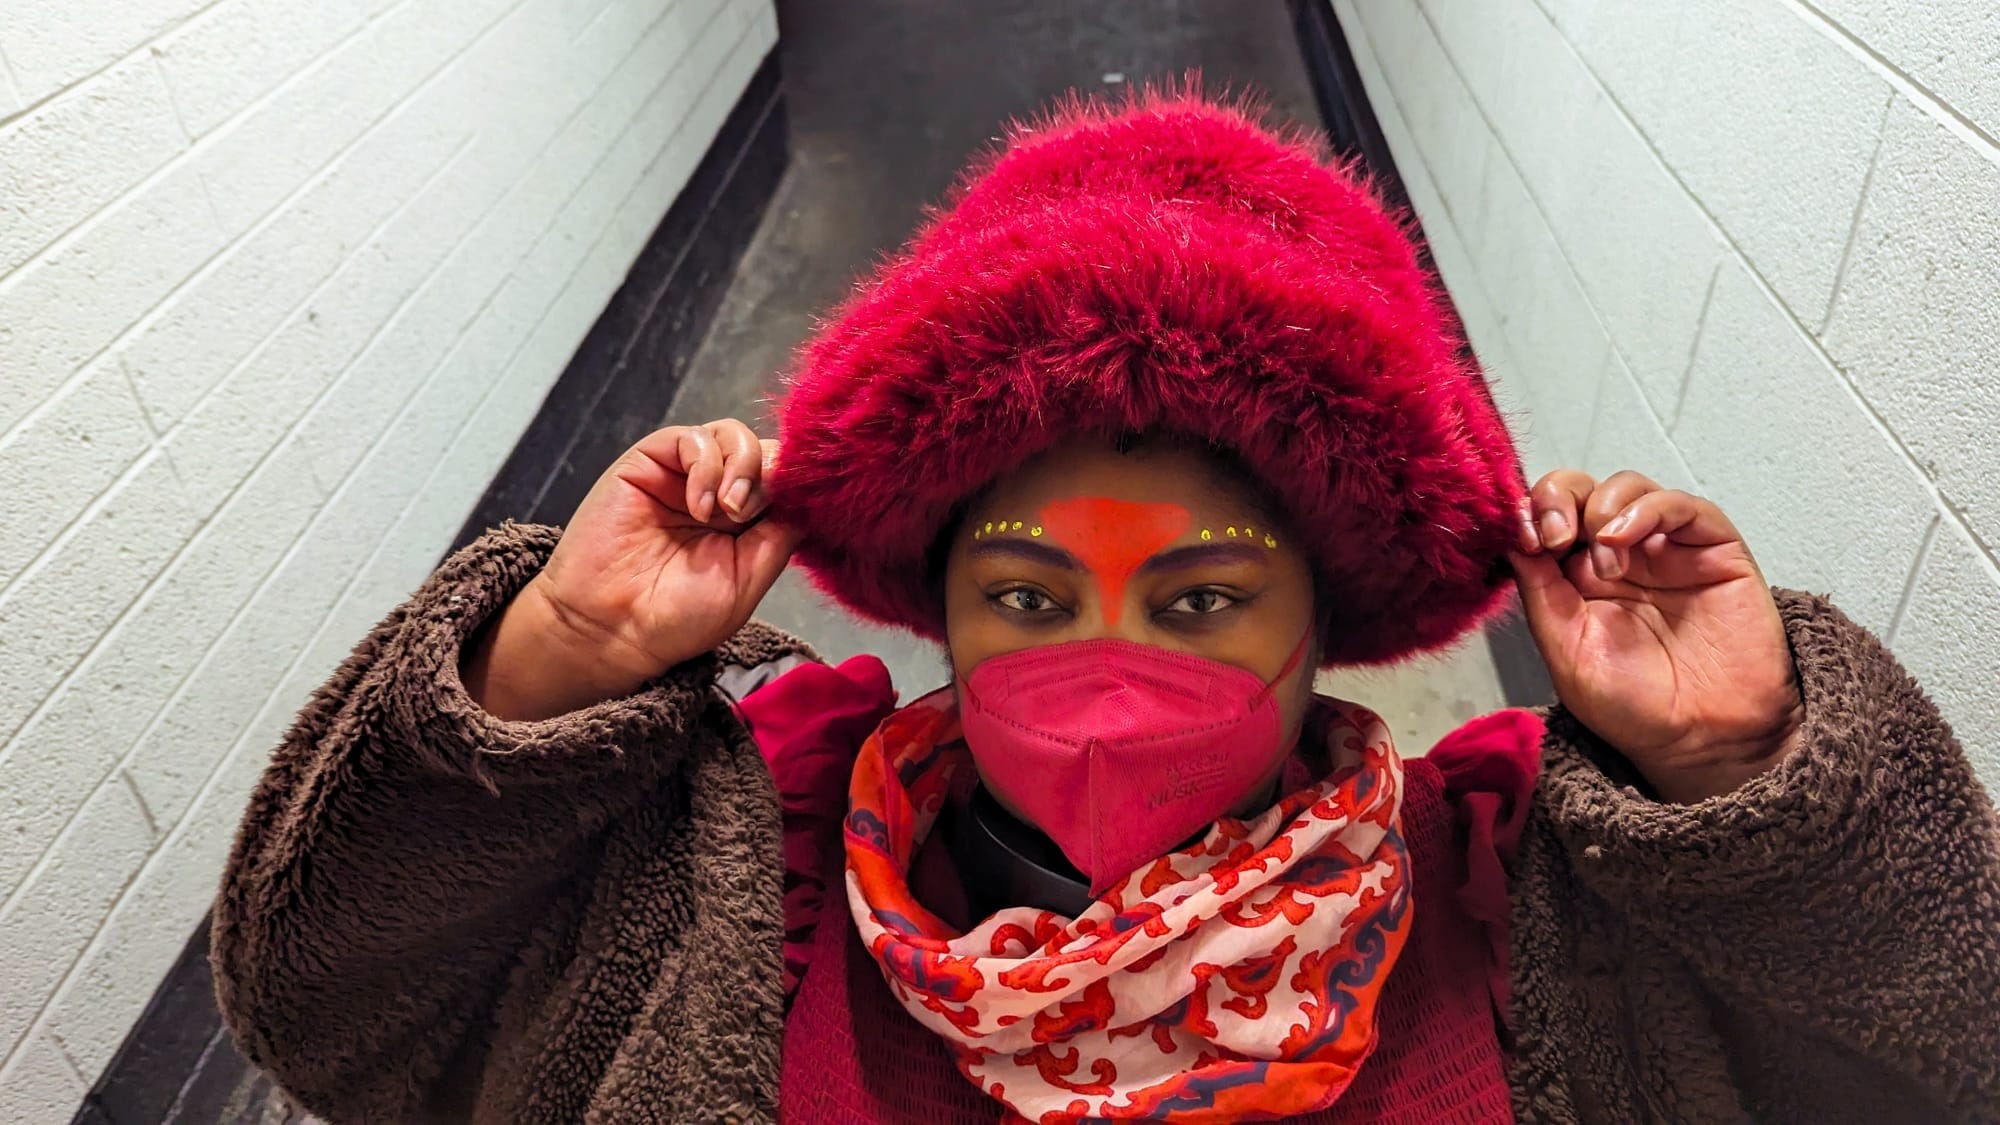 West African person in a hallway, wearing red and brown with a red kn95 mask